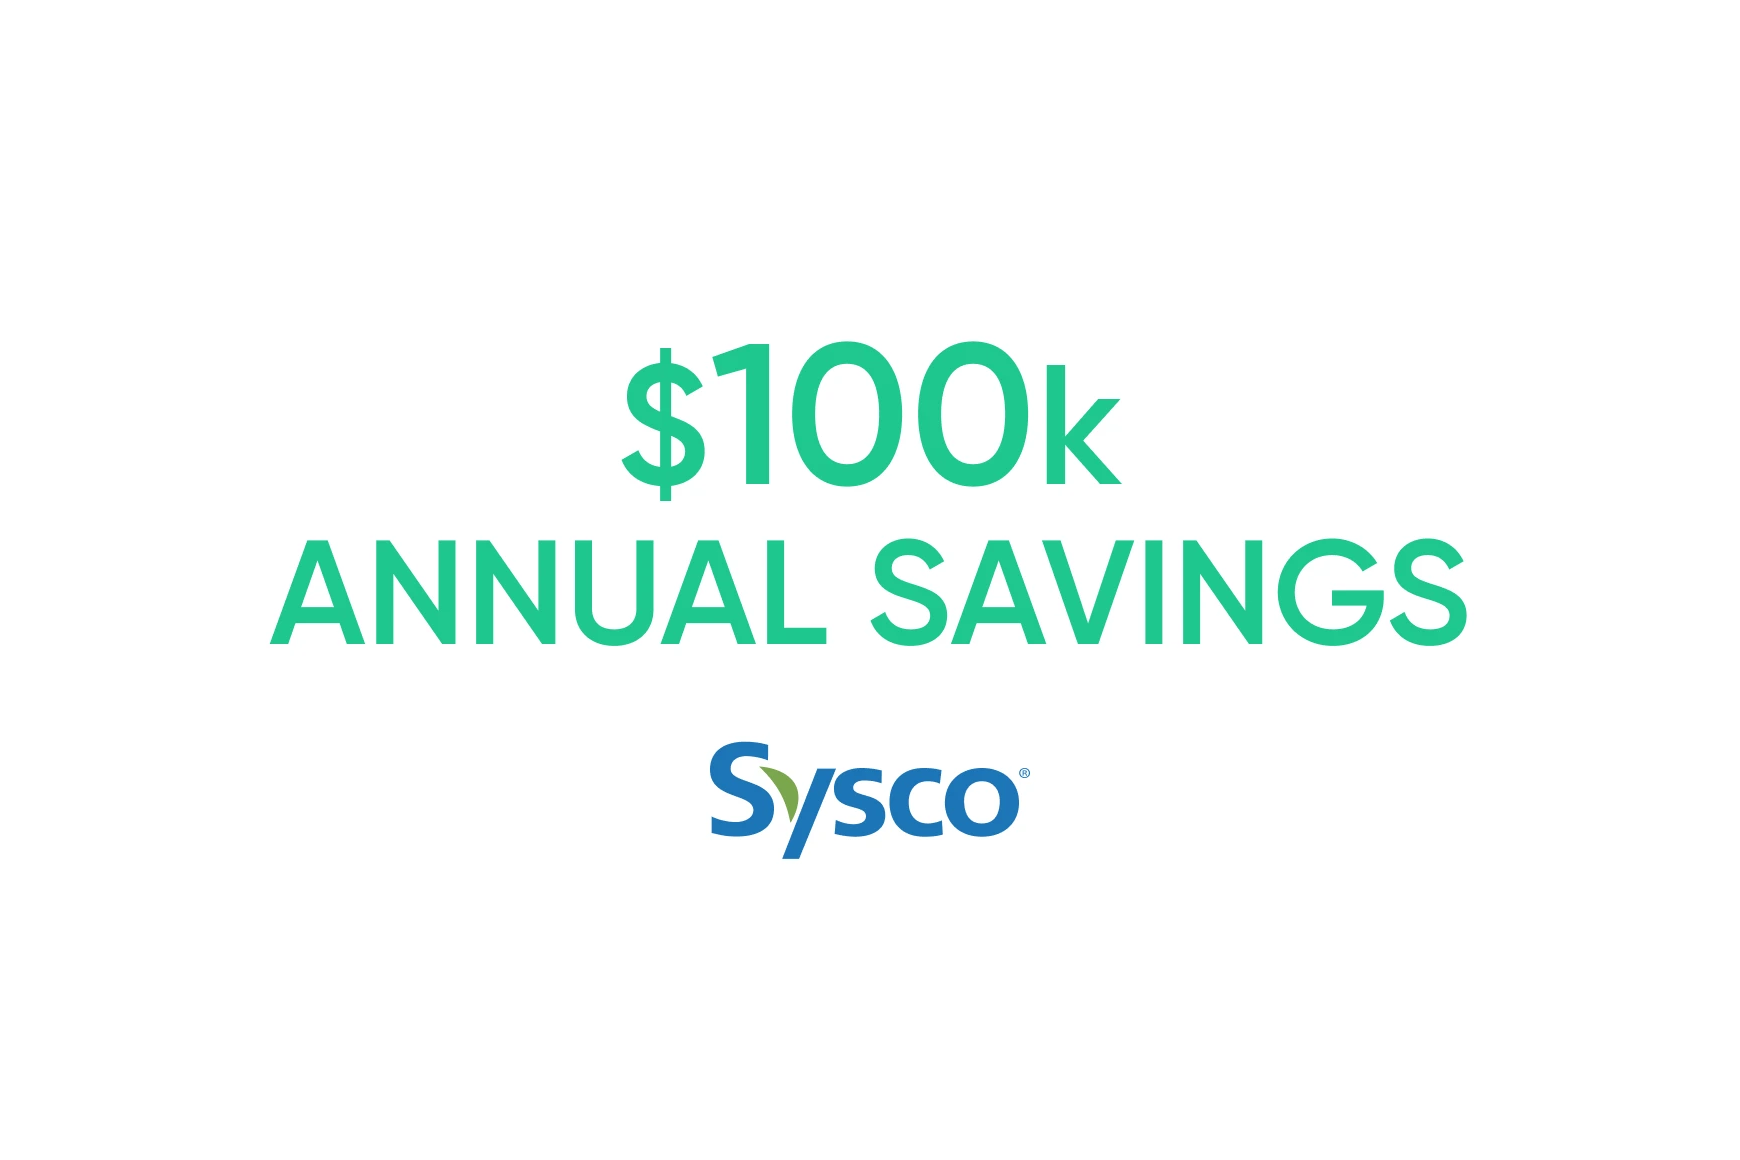 Sysco: Boosted customer satisfaction and saved money with virtual agents